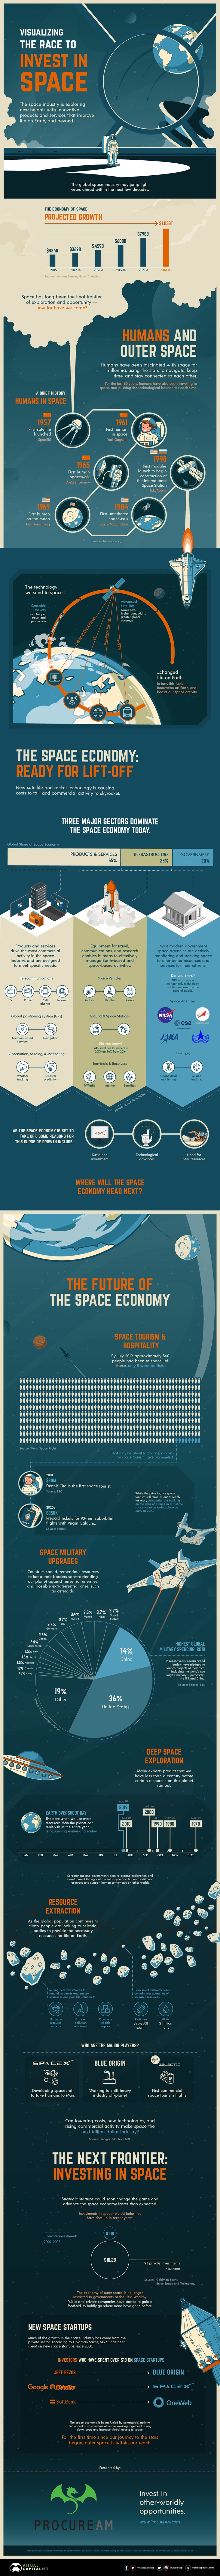 Visualized: The Race to Invest in the Space Economy